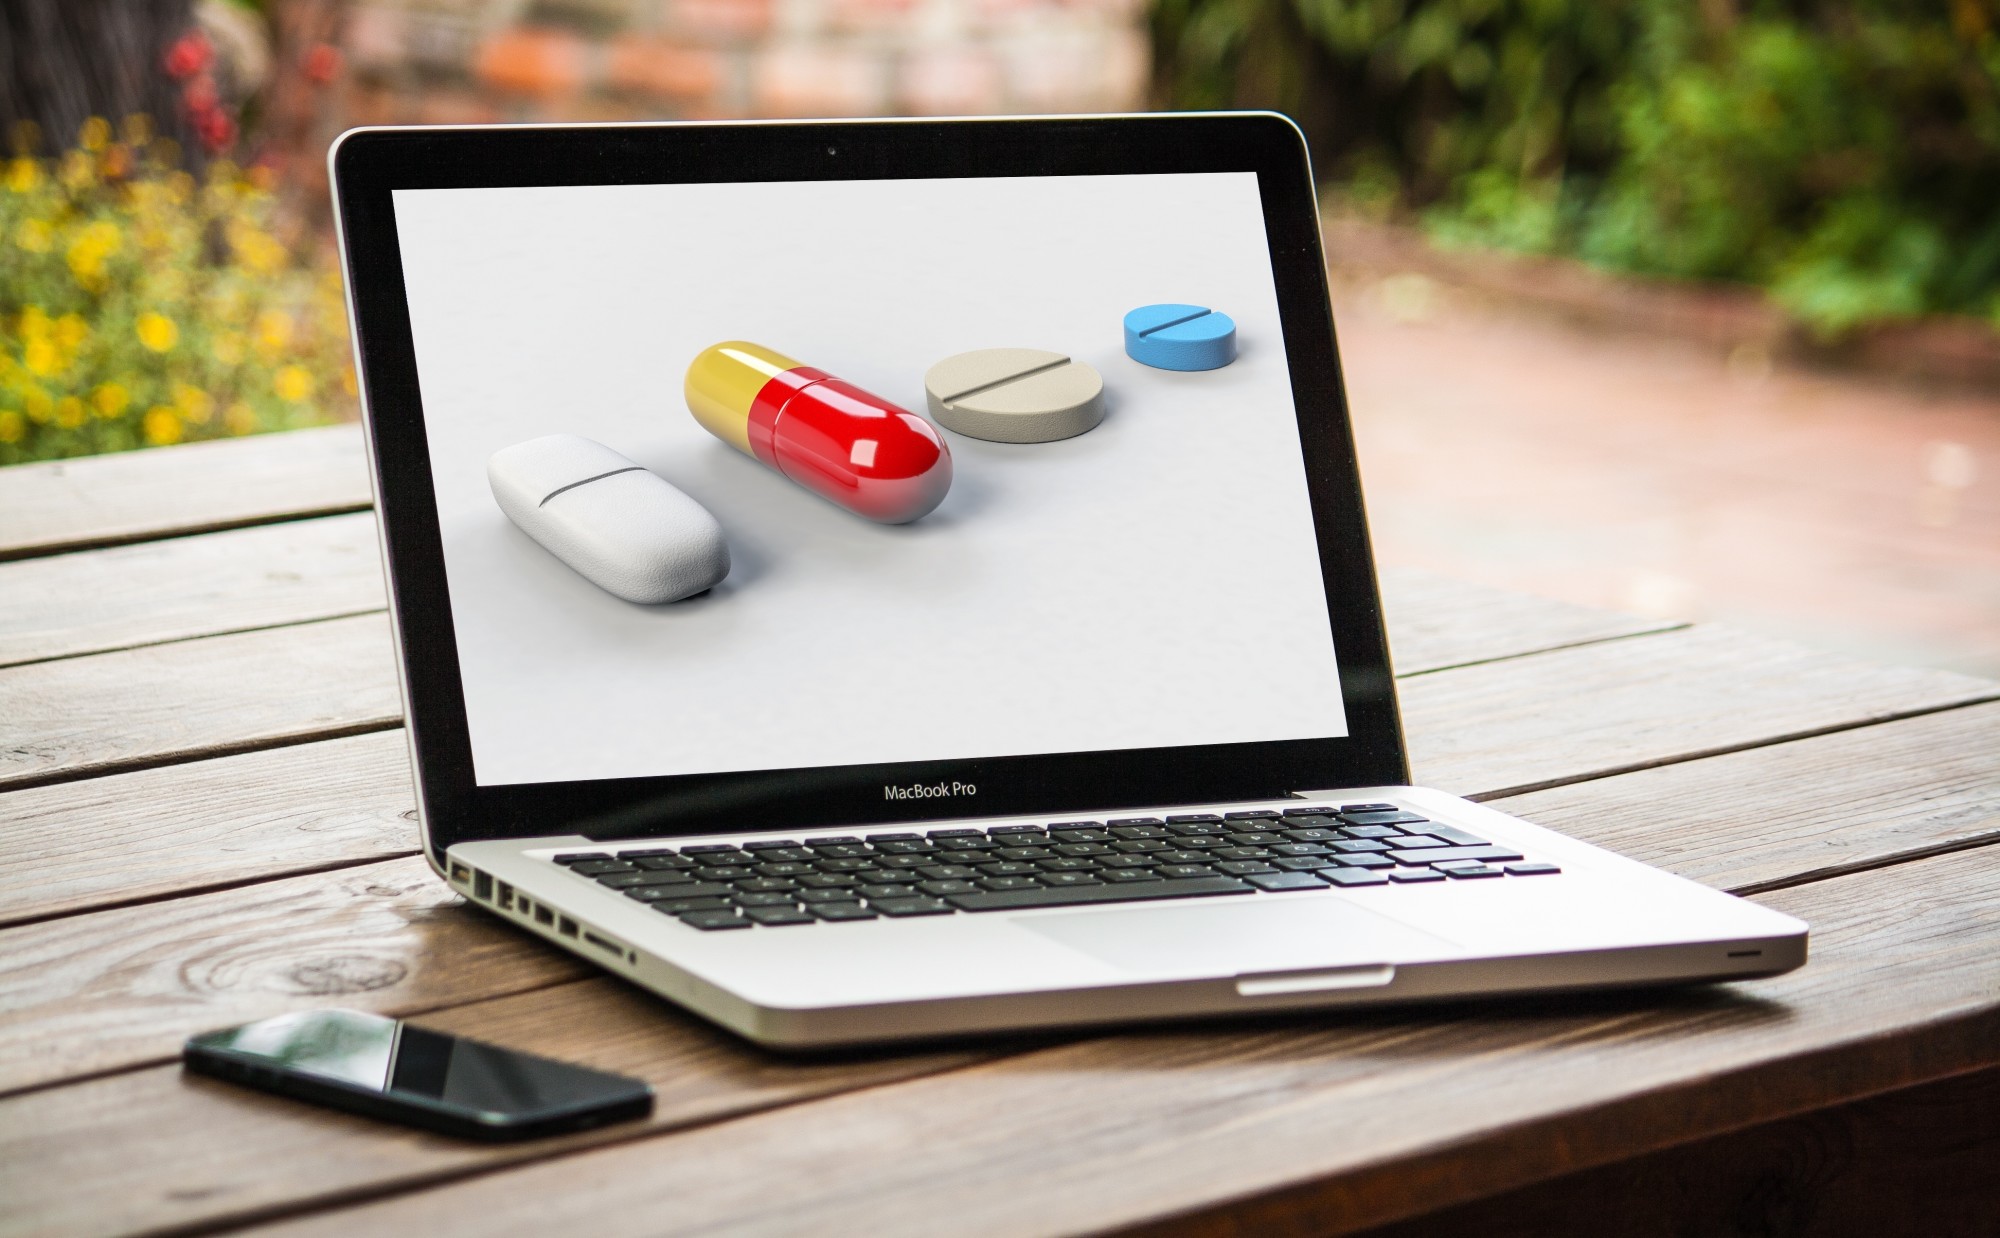 Laptop computer on table, shows different options for buying prescription drugs online.